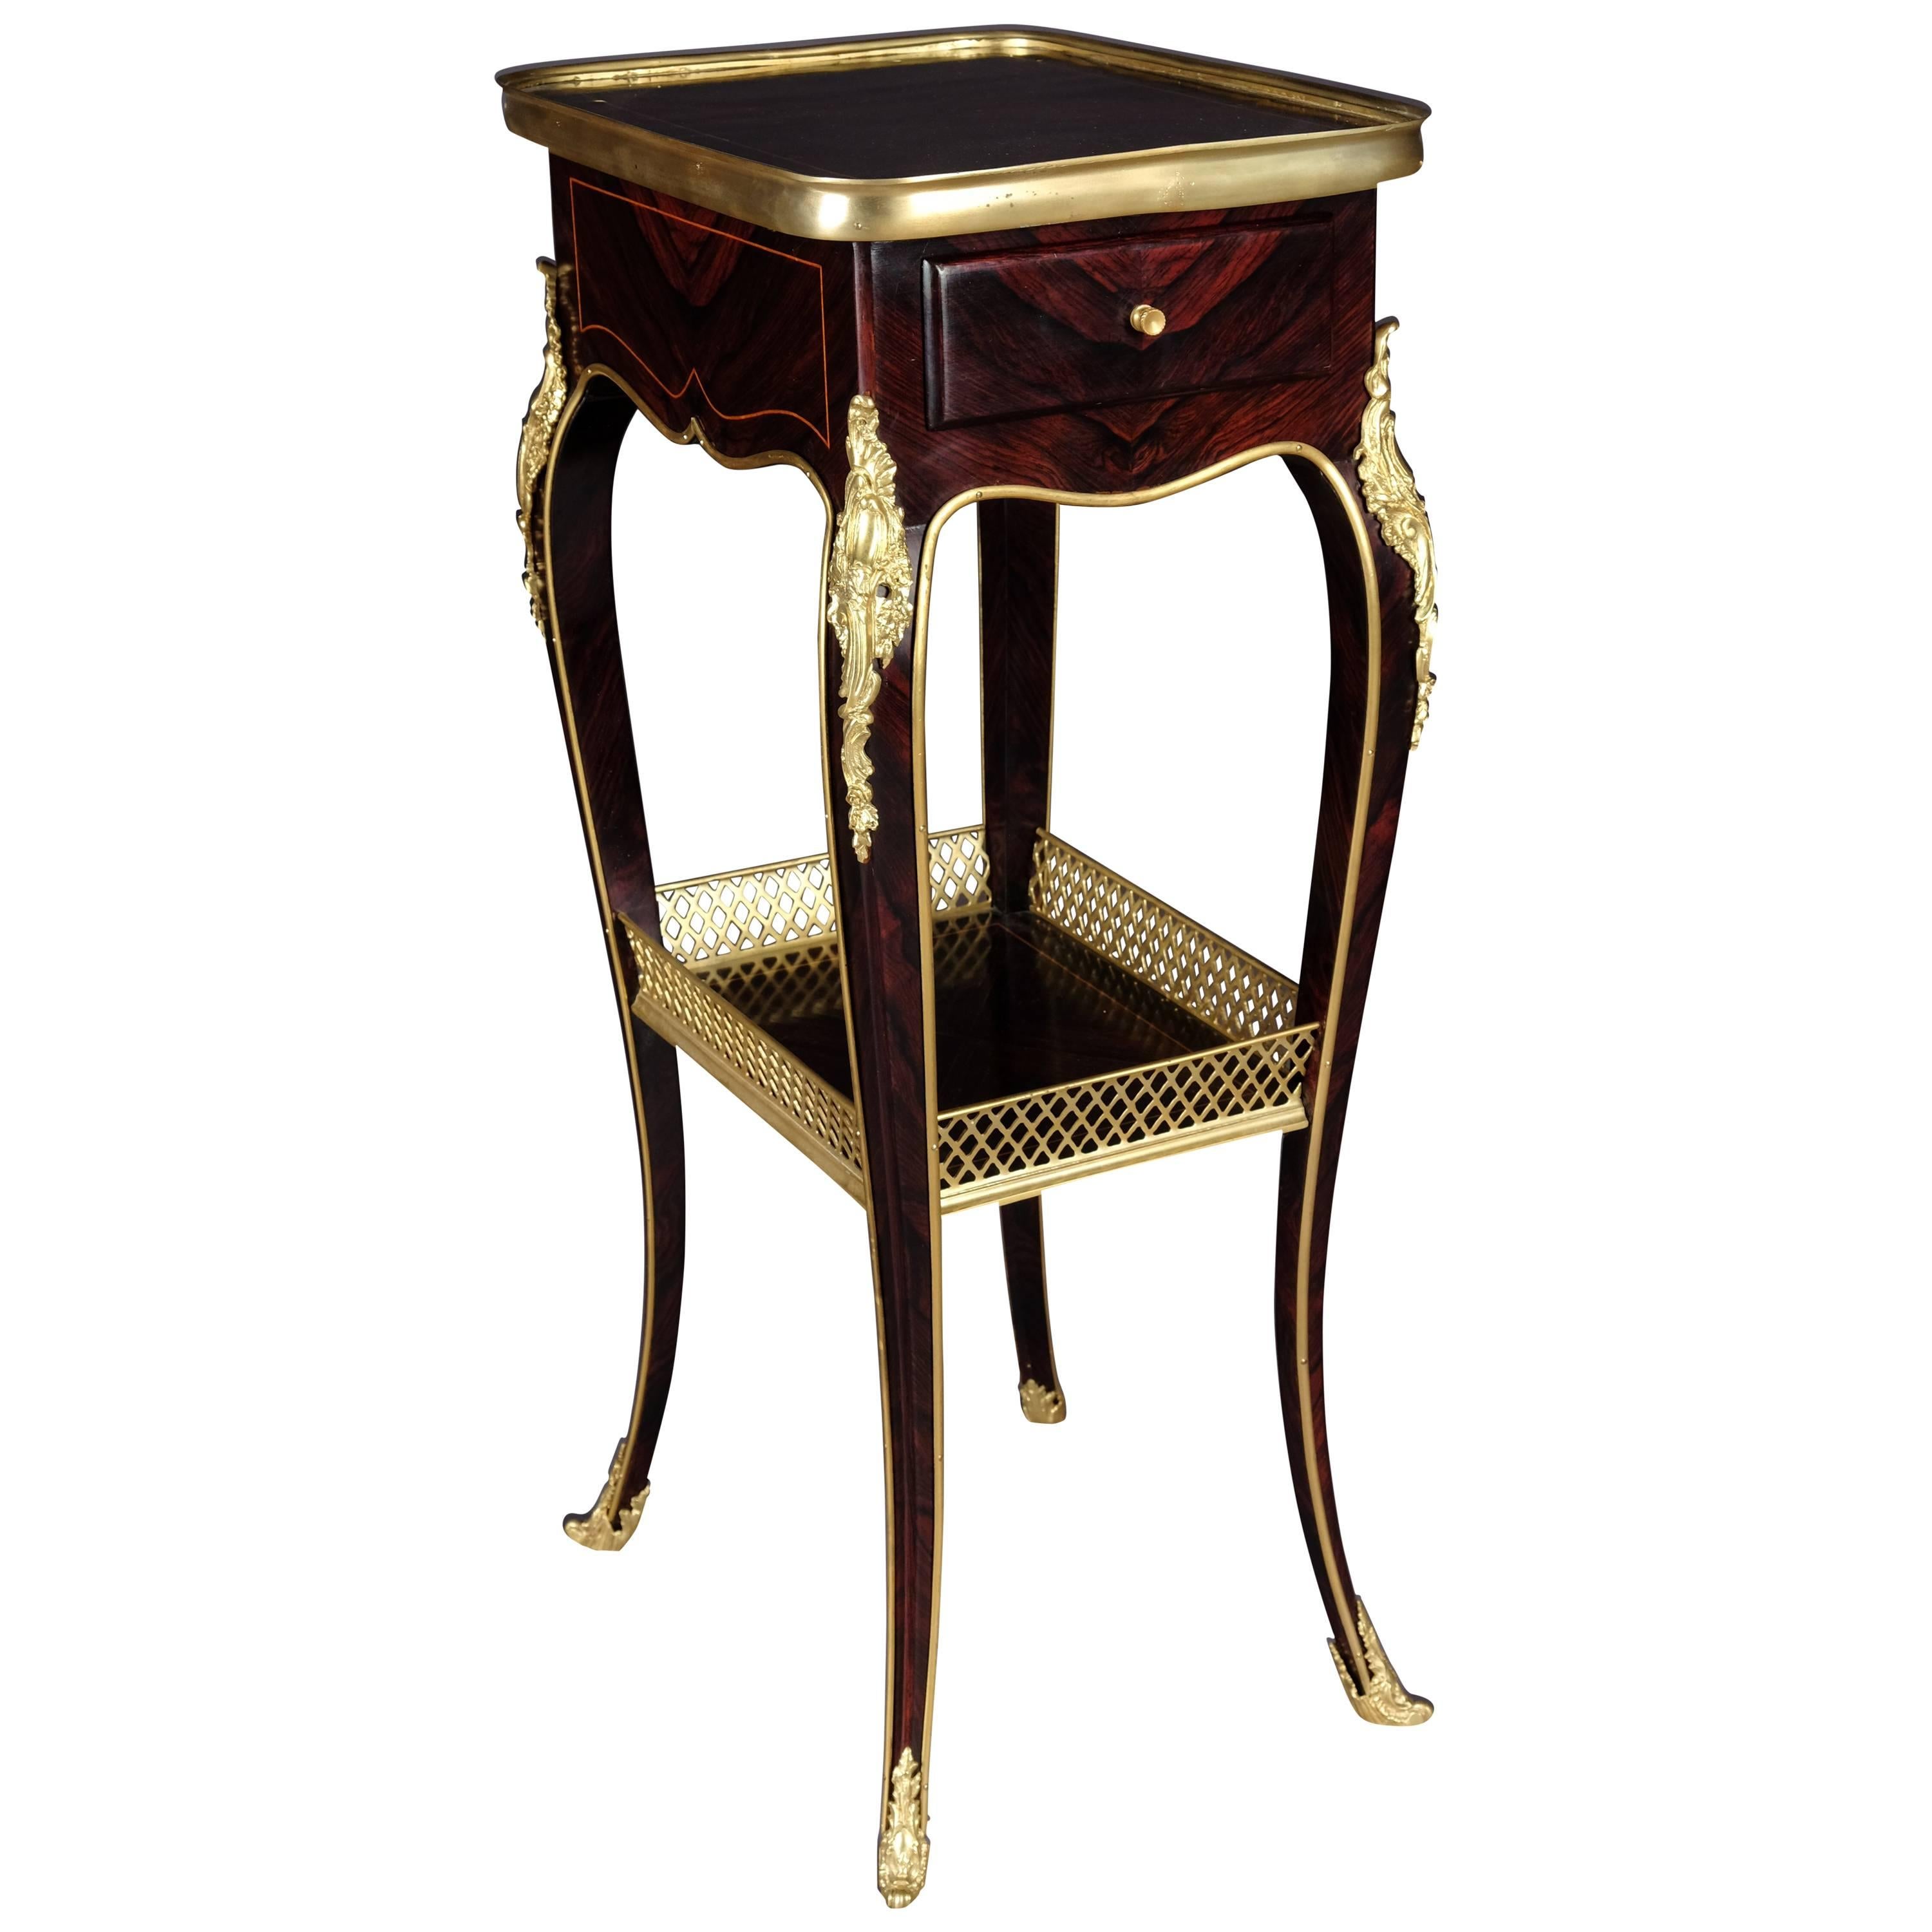 Filigree Side Table in Louis XVI Style after Henry Dasson, Paris